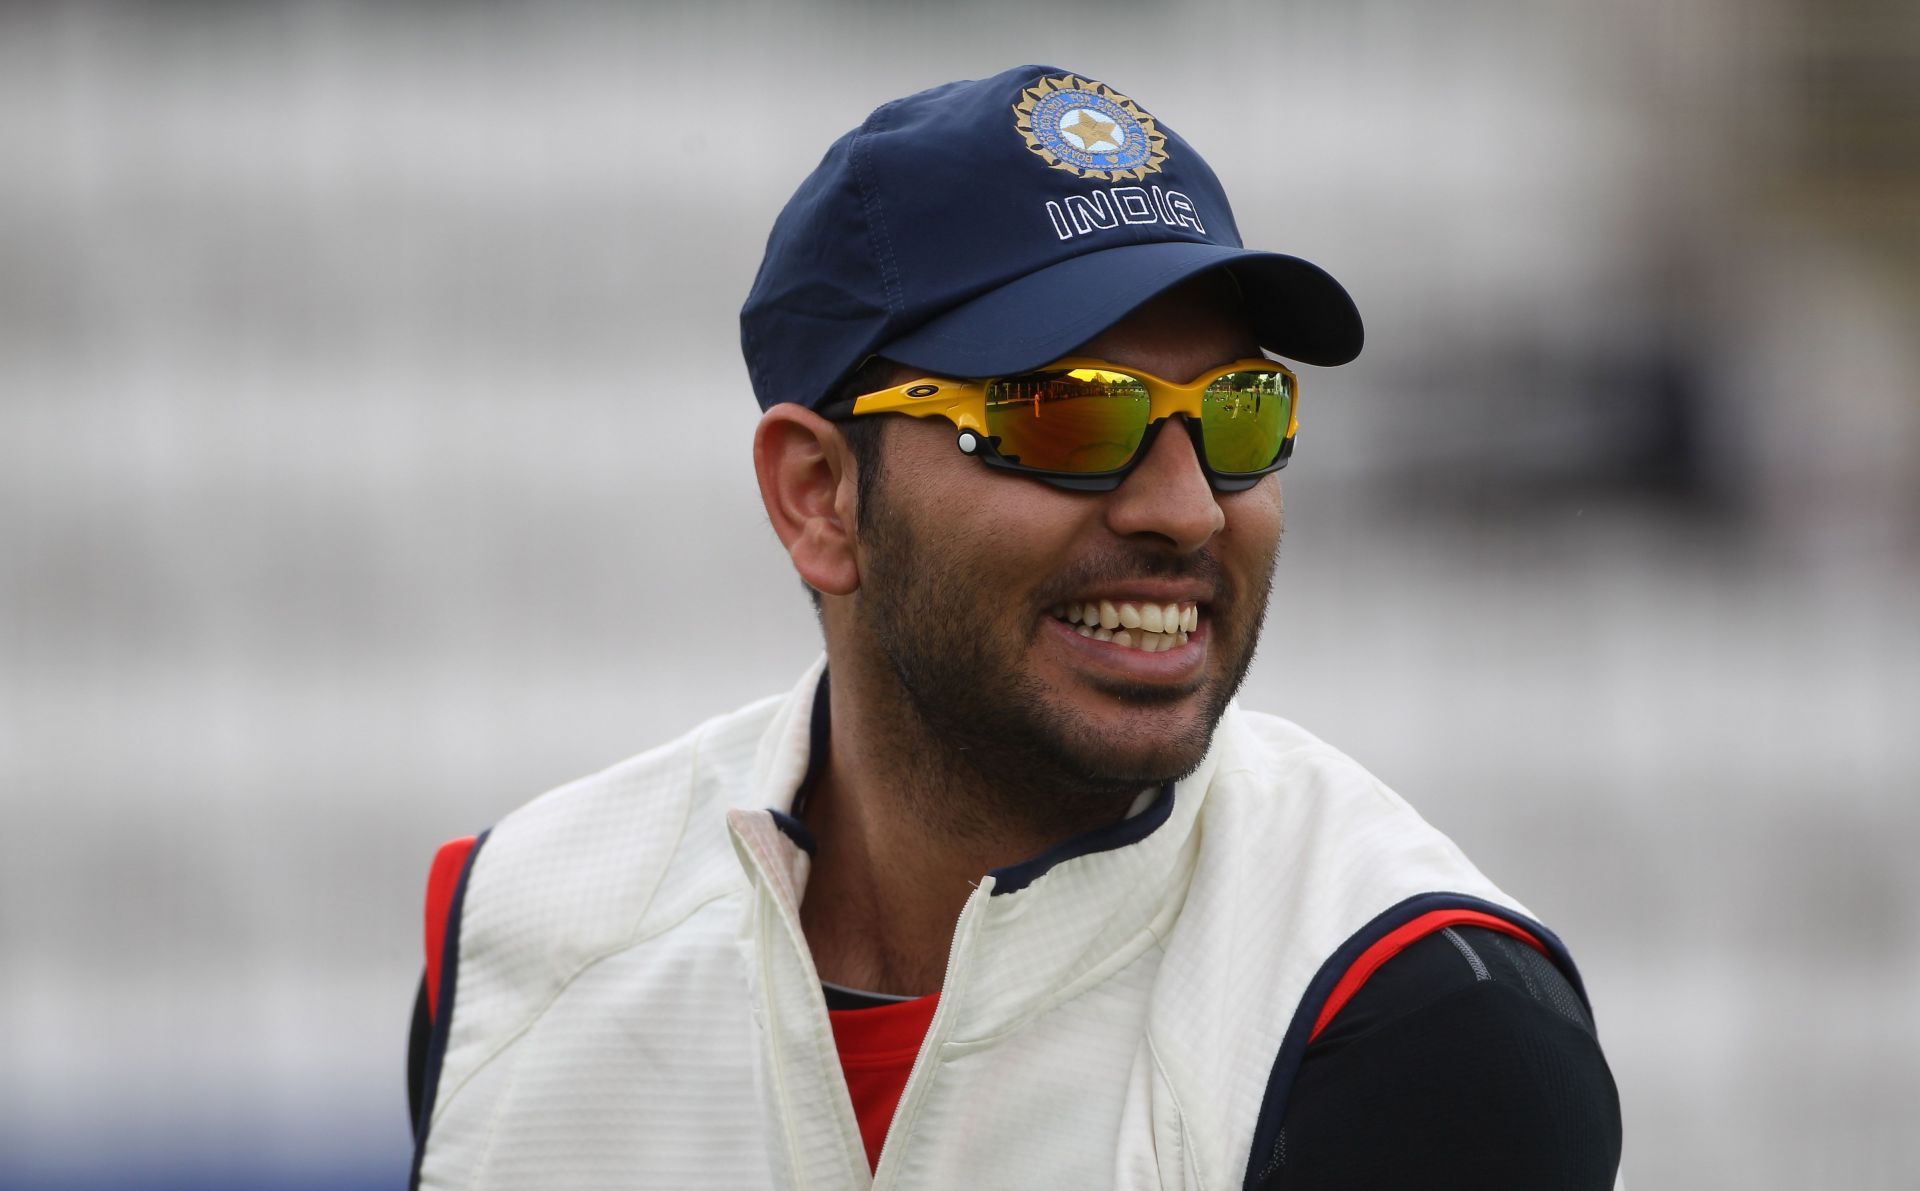 Yuvraj Singh retired from the game three years ago